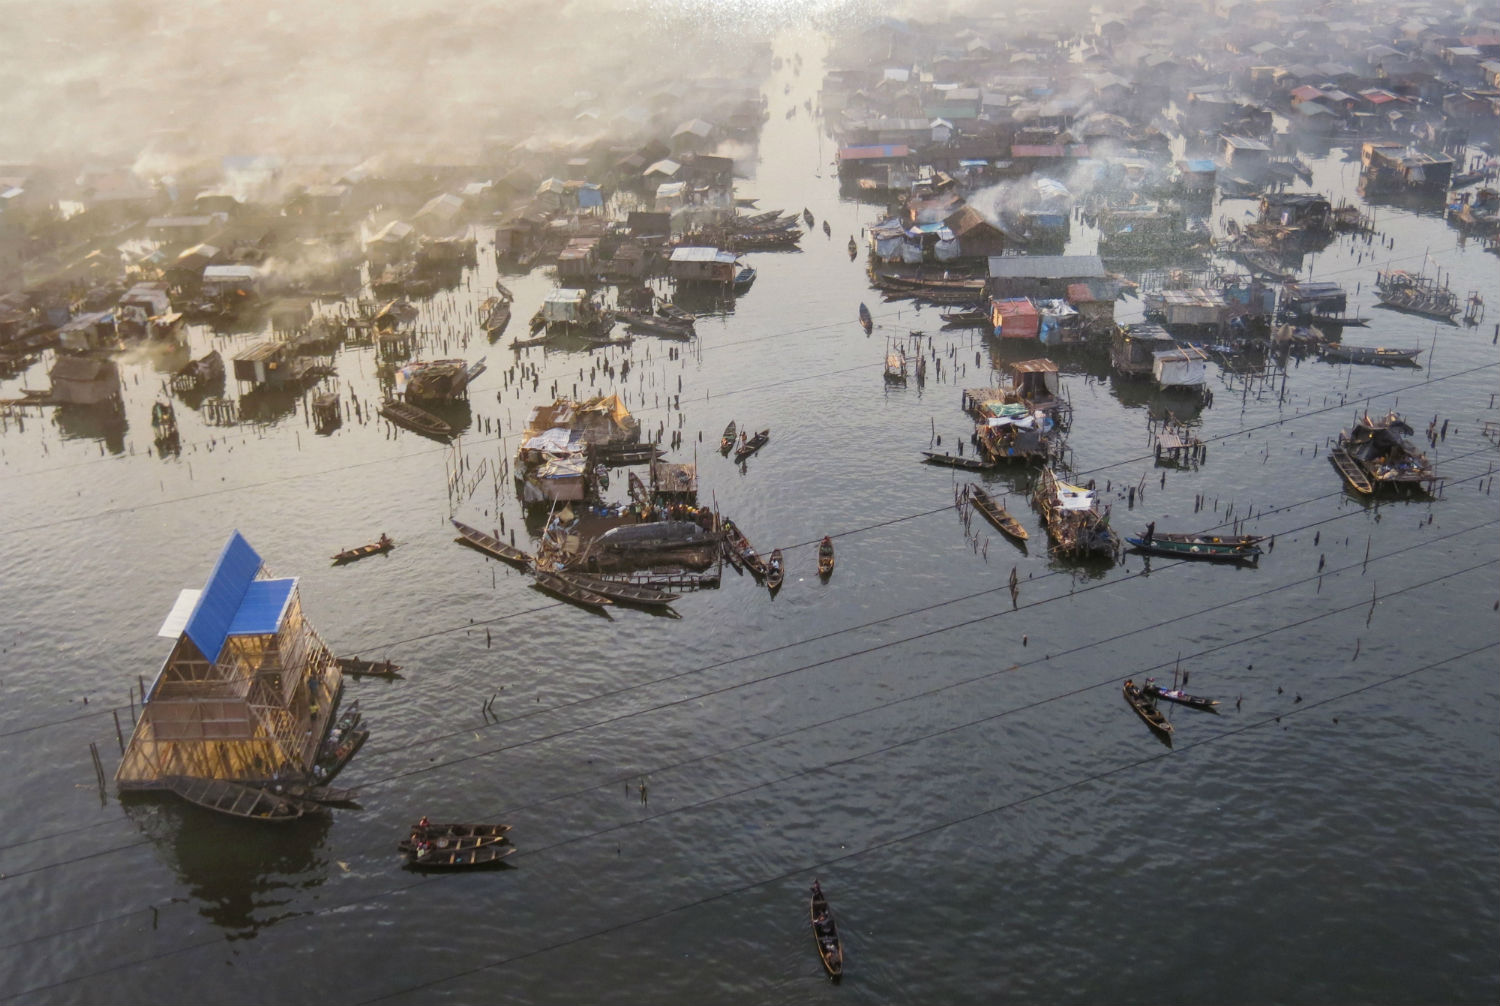 Makoko slum and finished floating school. Thousands of people live in this neighbourhood, which has grown incrementally over the centuries to create an informal but fully functioning settlement. The district is under threat from property speculators and regeneration schemes
